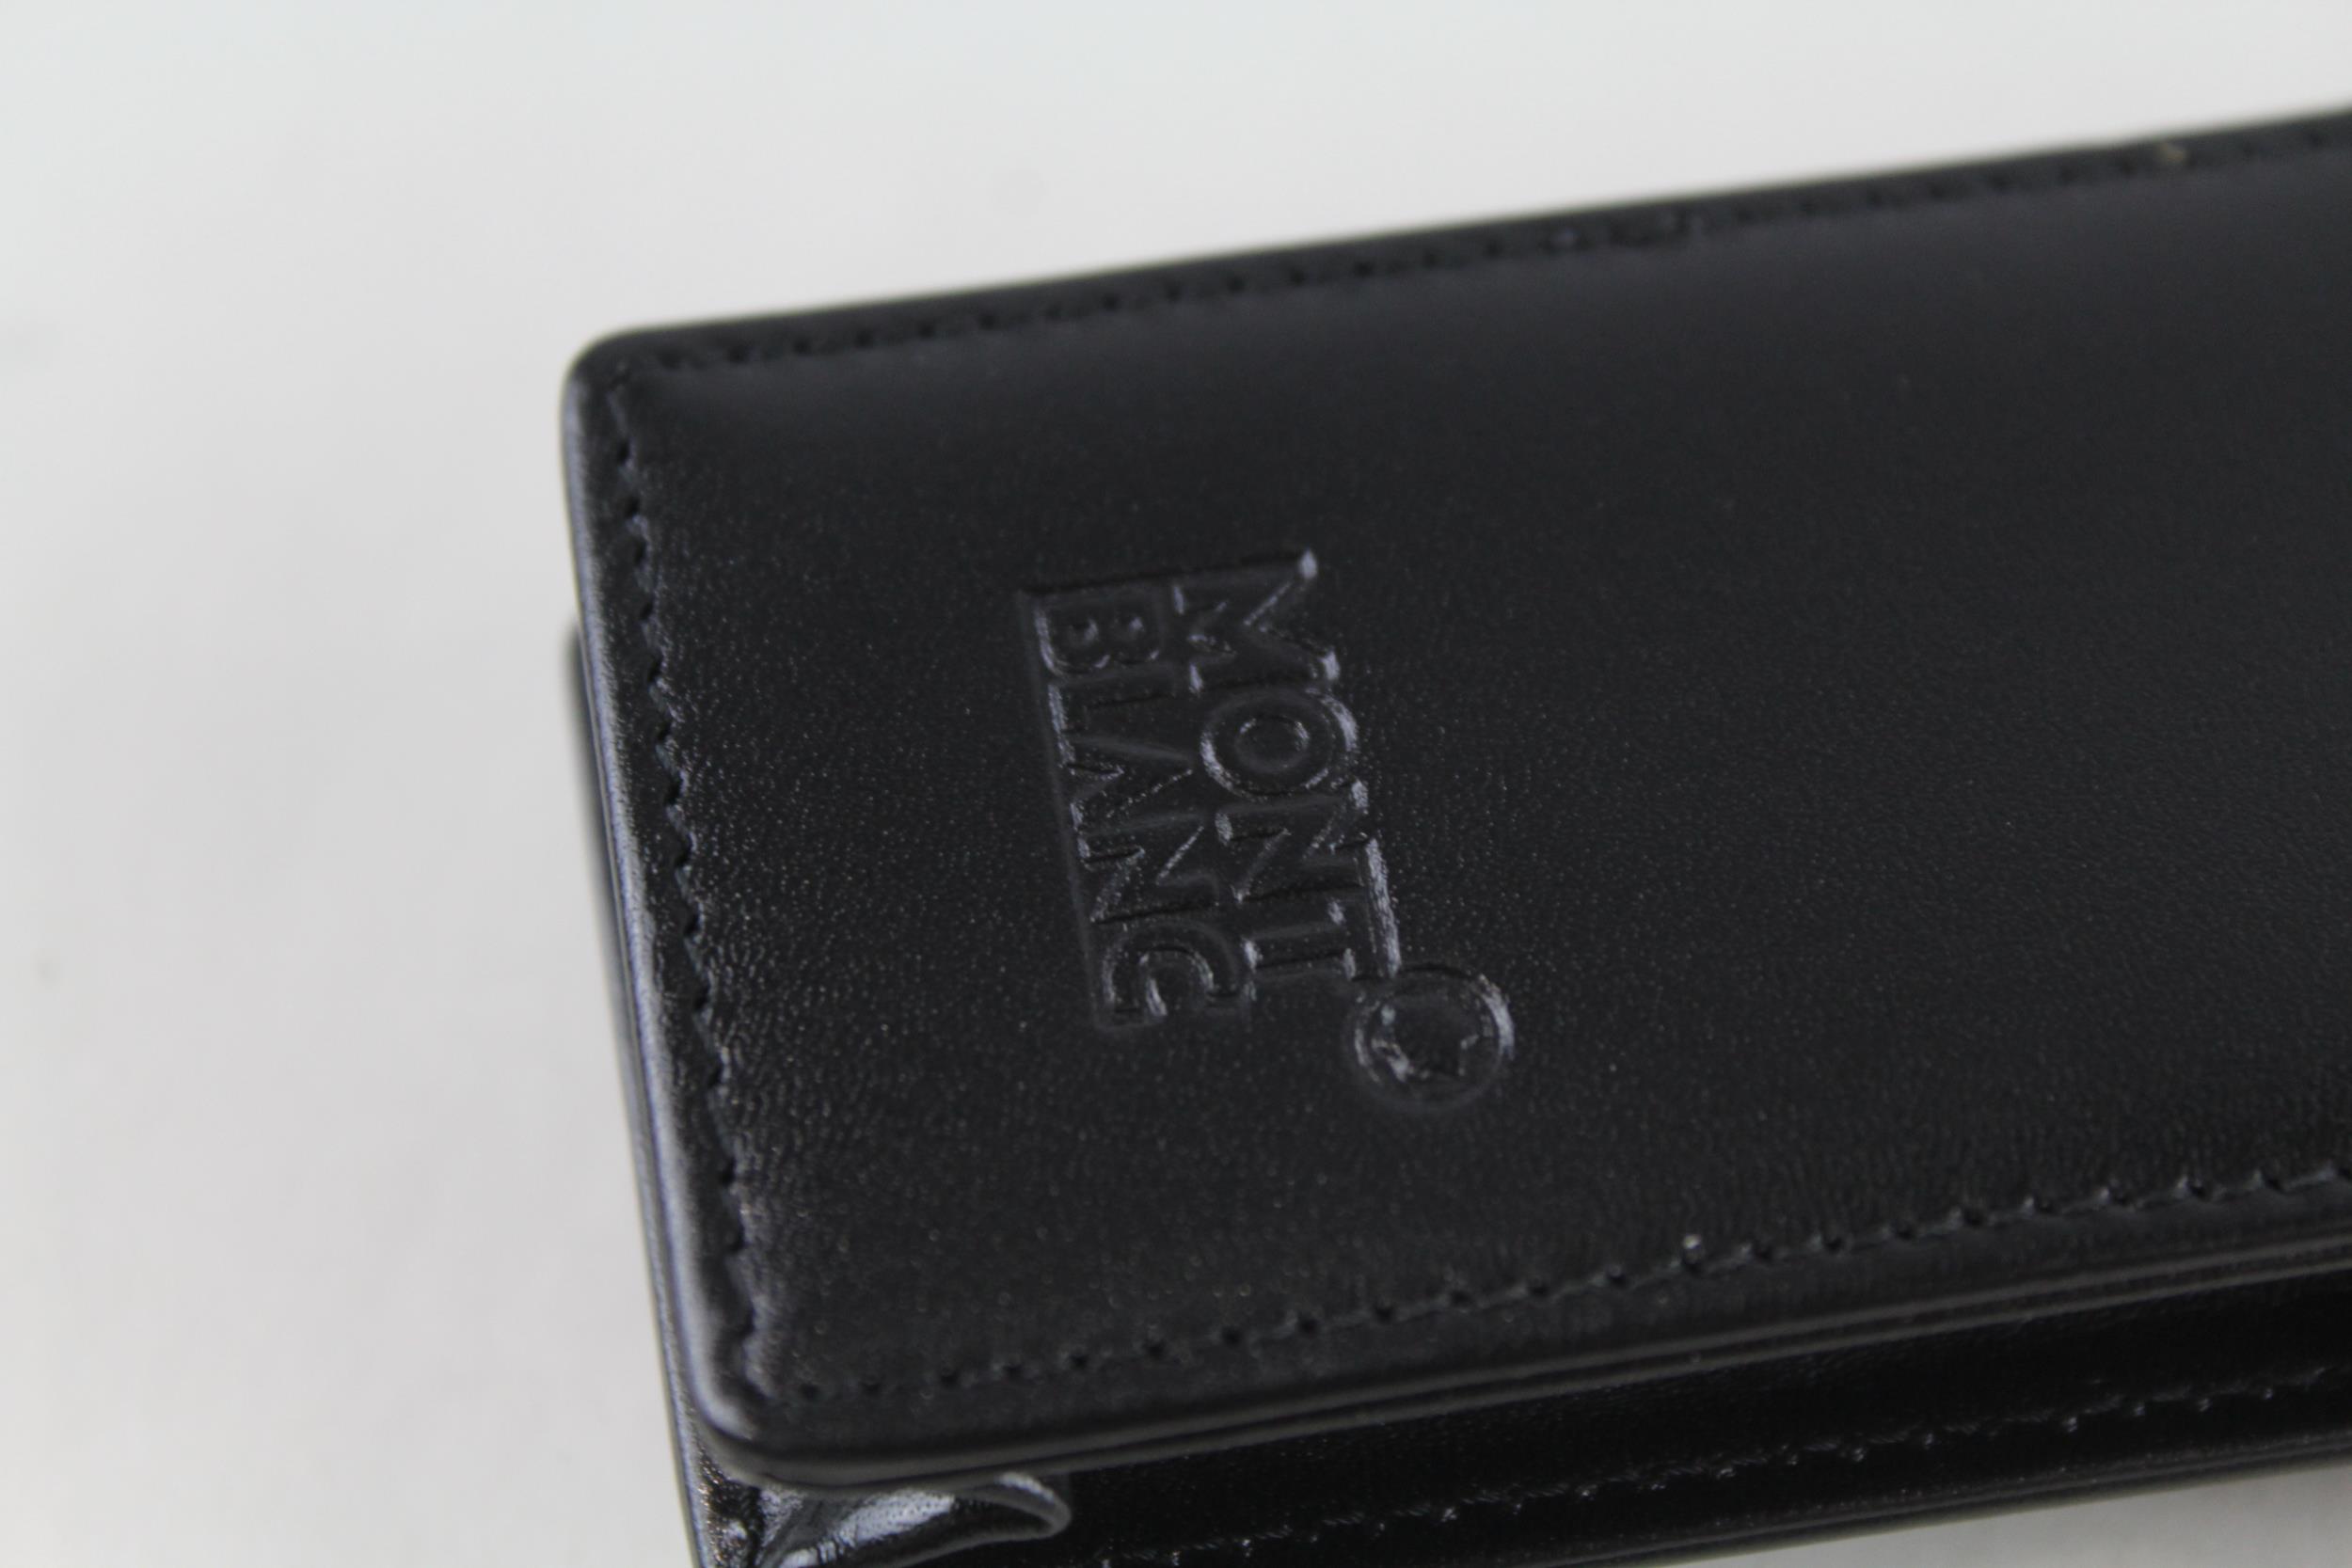 MONTBLANC Meisterstuck Black Leather 2 Compartment Pen Pouch - Dimensions - 4.5cm(w) x 17cm(h) In - Image 5 of 5